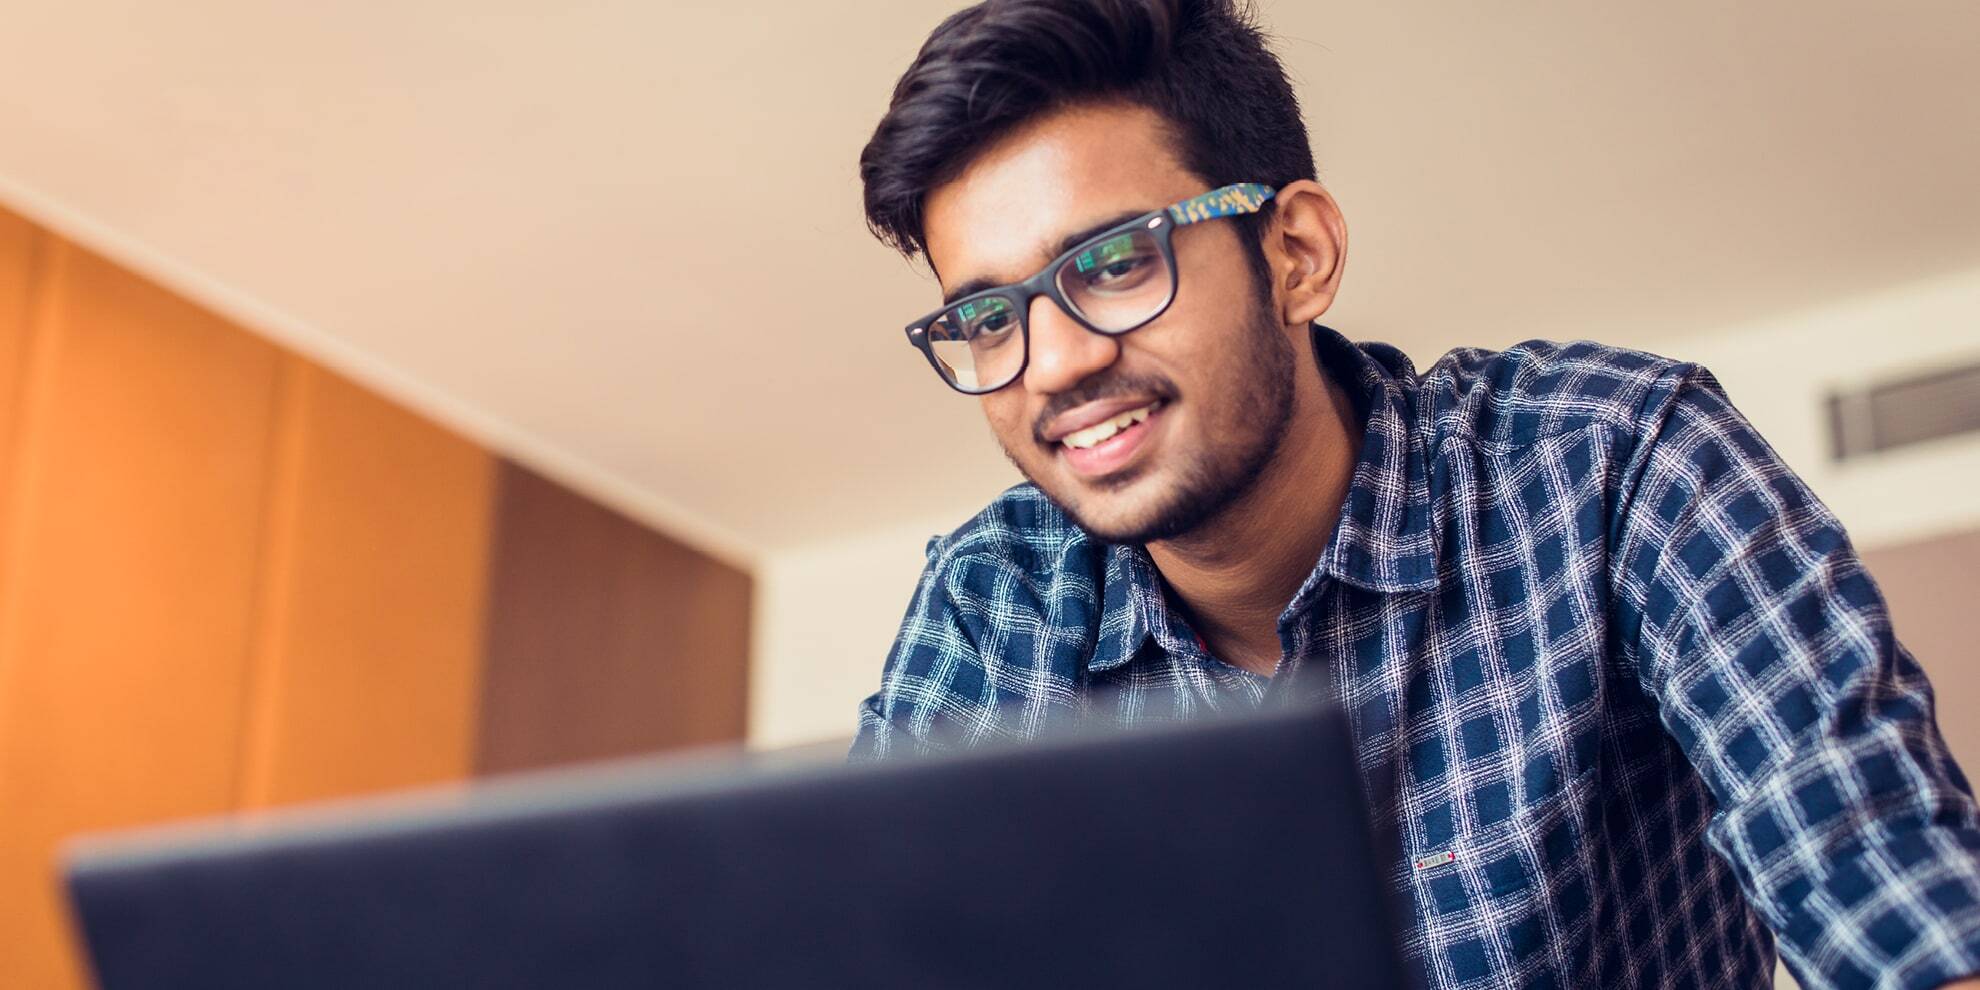 Top 25 Online Courses in Bangladesh - Study for Free with FutureLearn